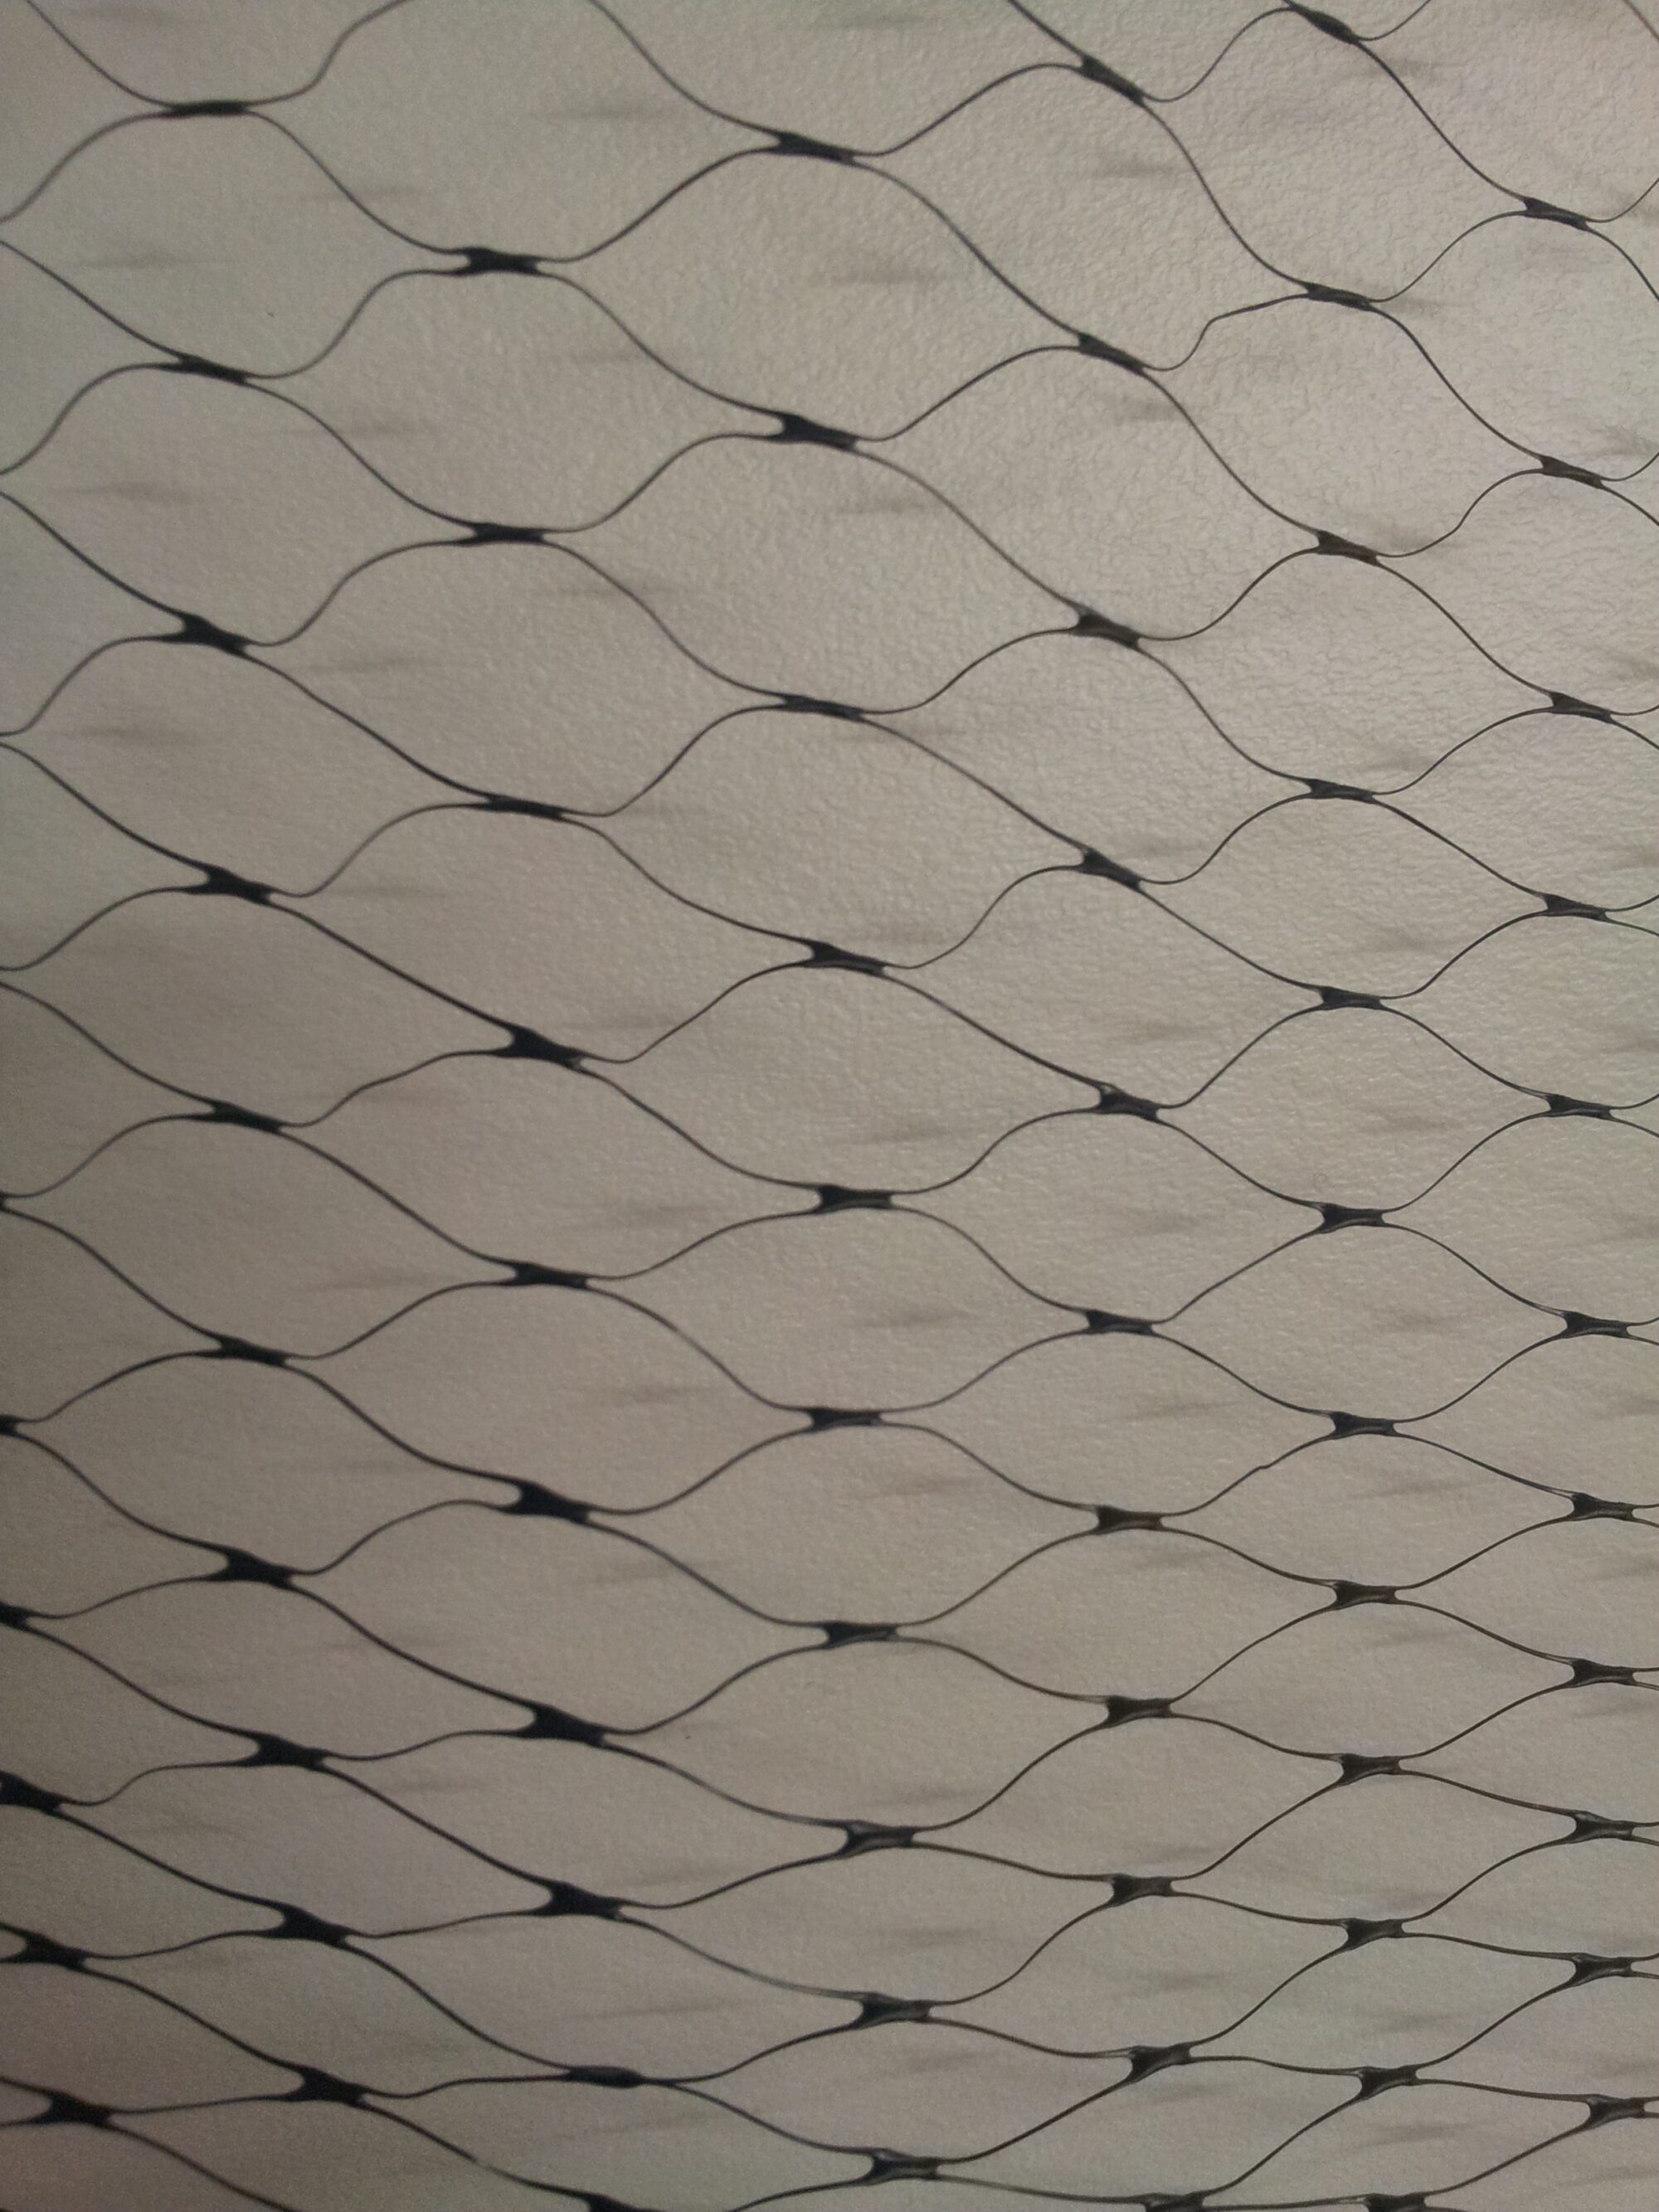 Extruded Net